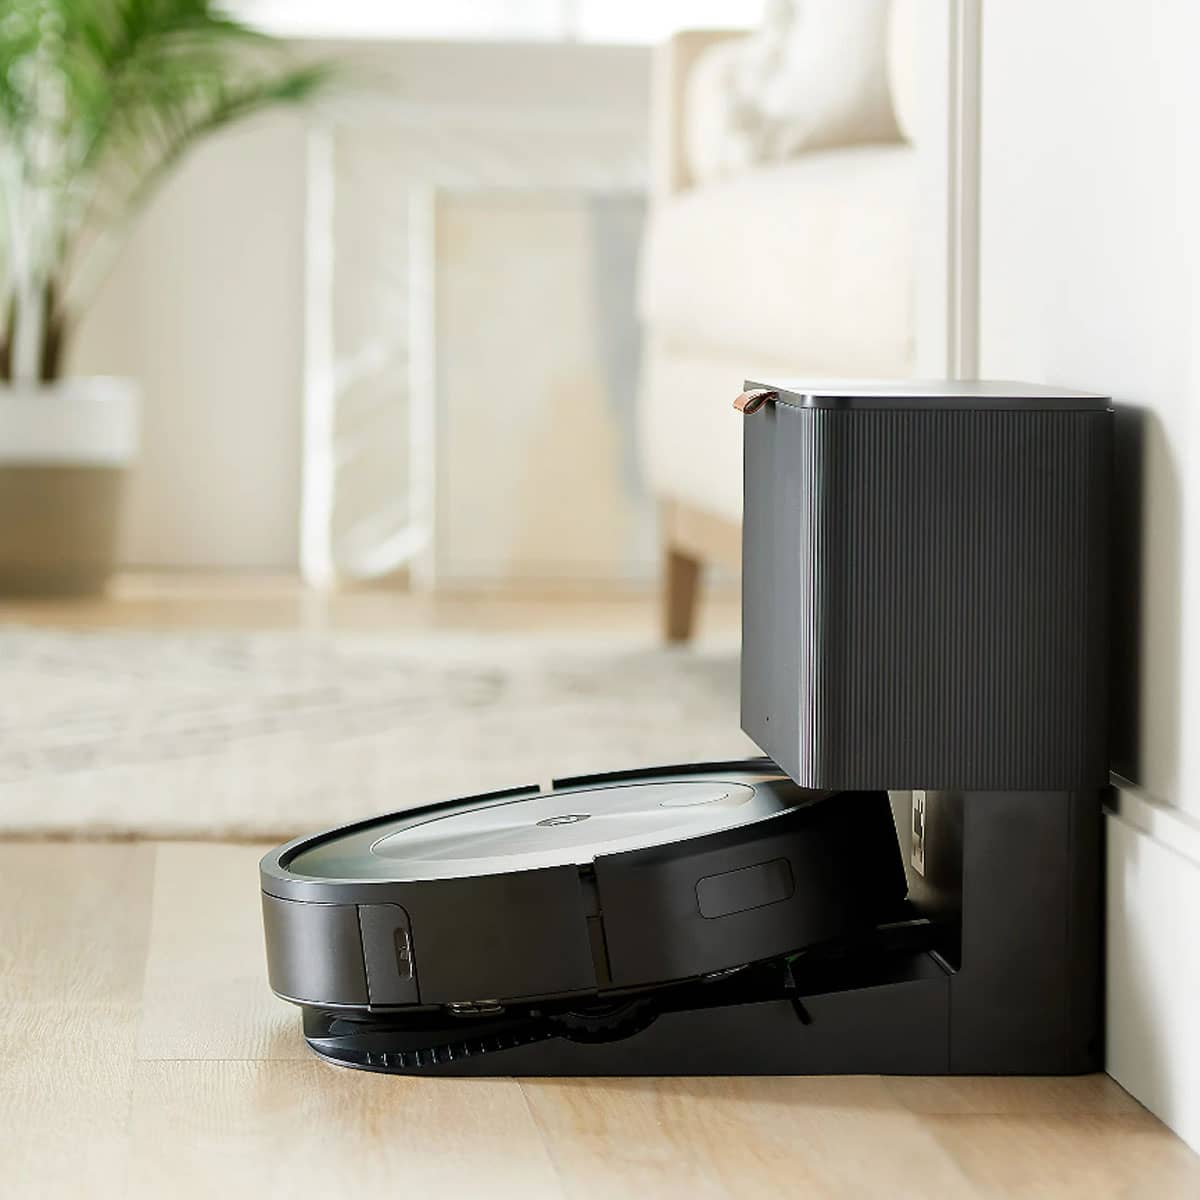 Roomba Won’t Charge: 7 Easy Ways To Fix The Problem Now